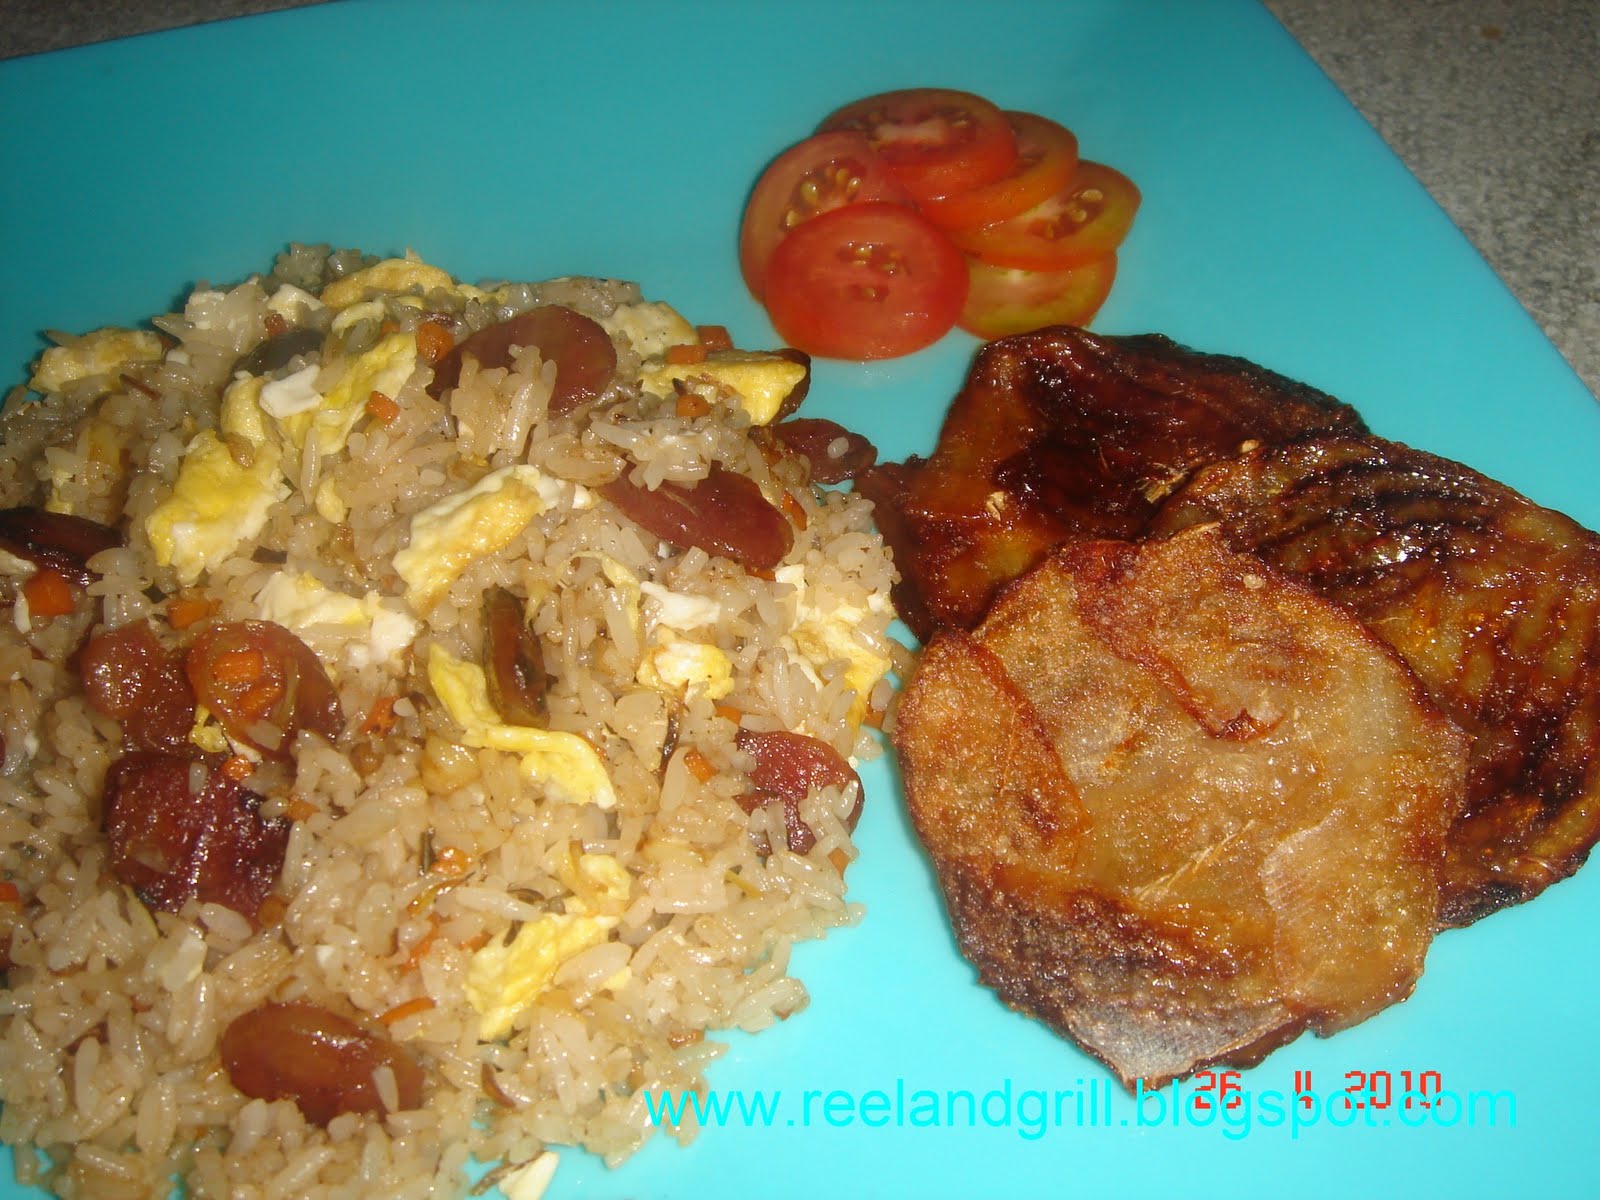 Reel and Grill: Chinese Fried Rice or Yang Chow Fried Rice